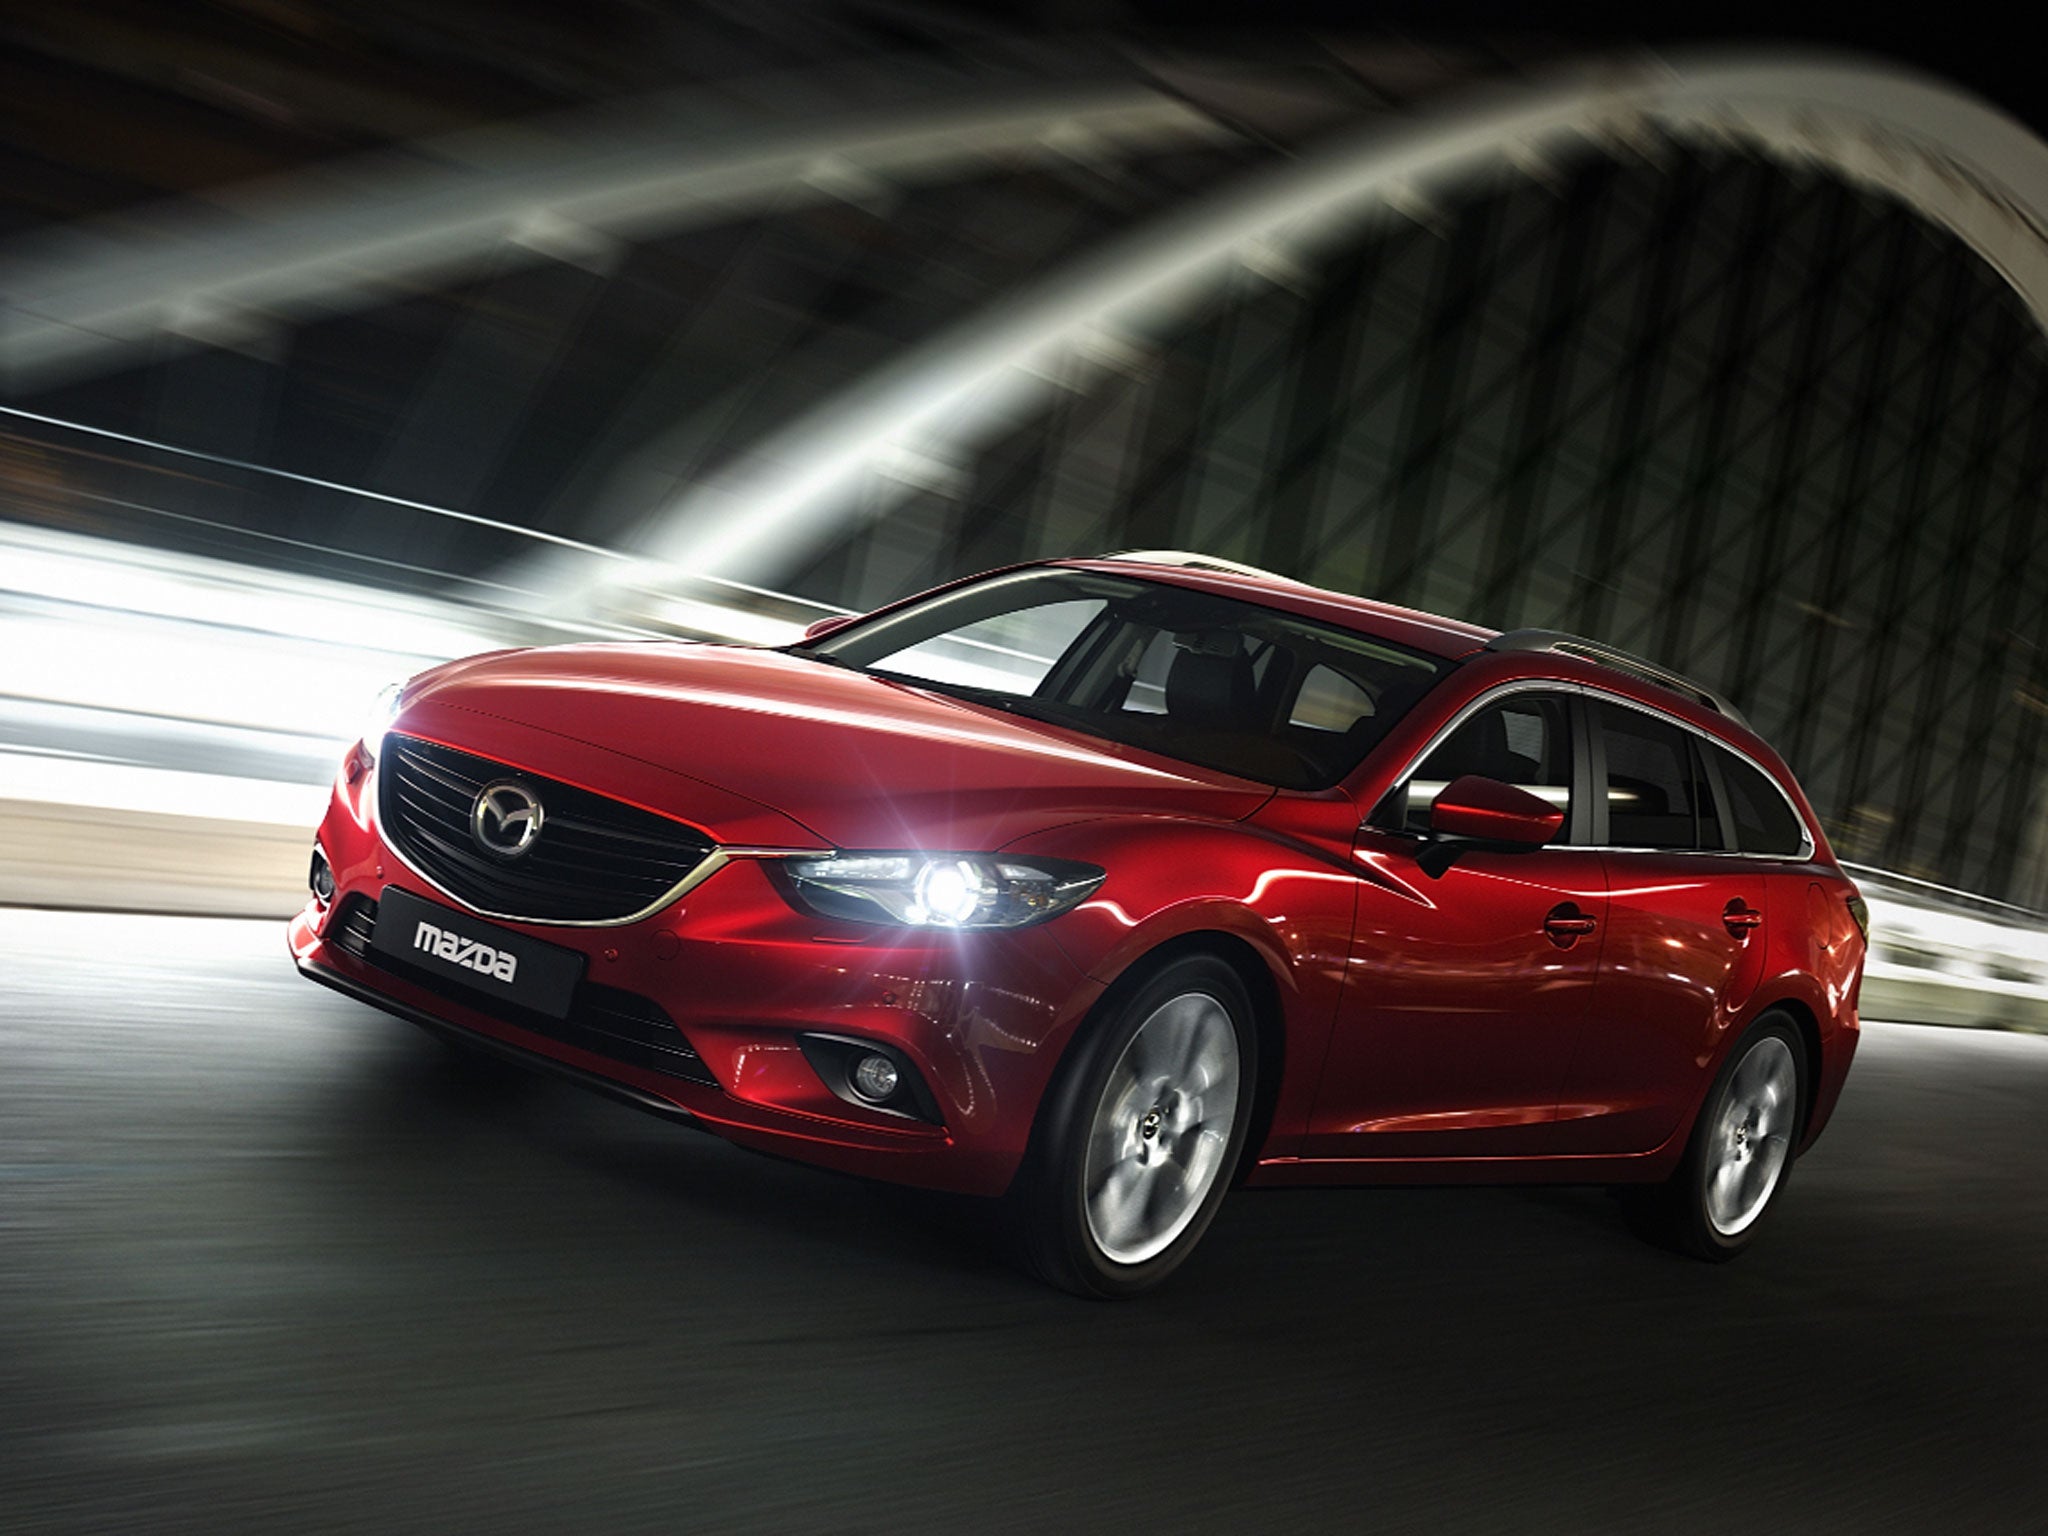 Comfort and control: The Mazda 6 Tourer